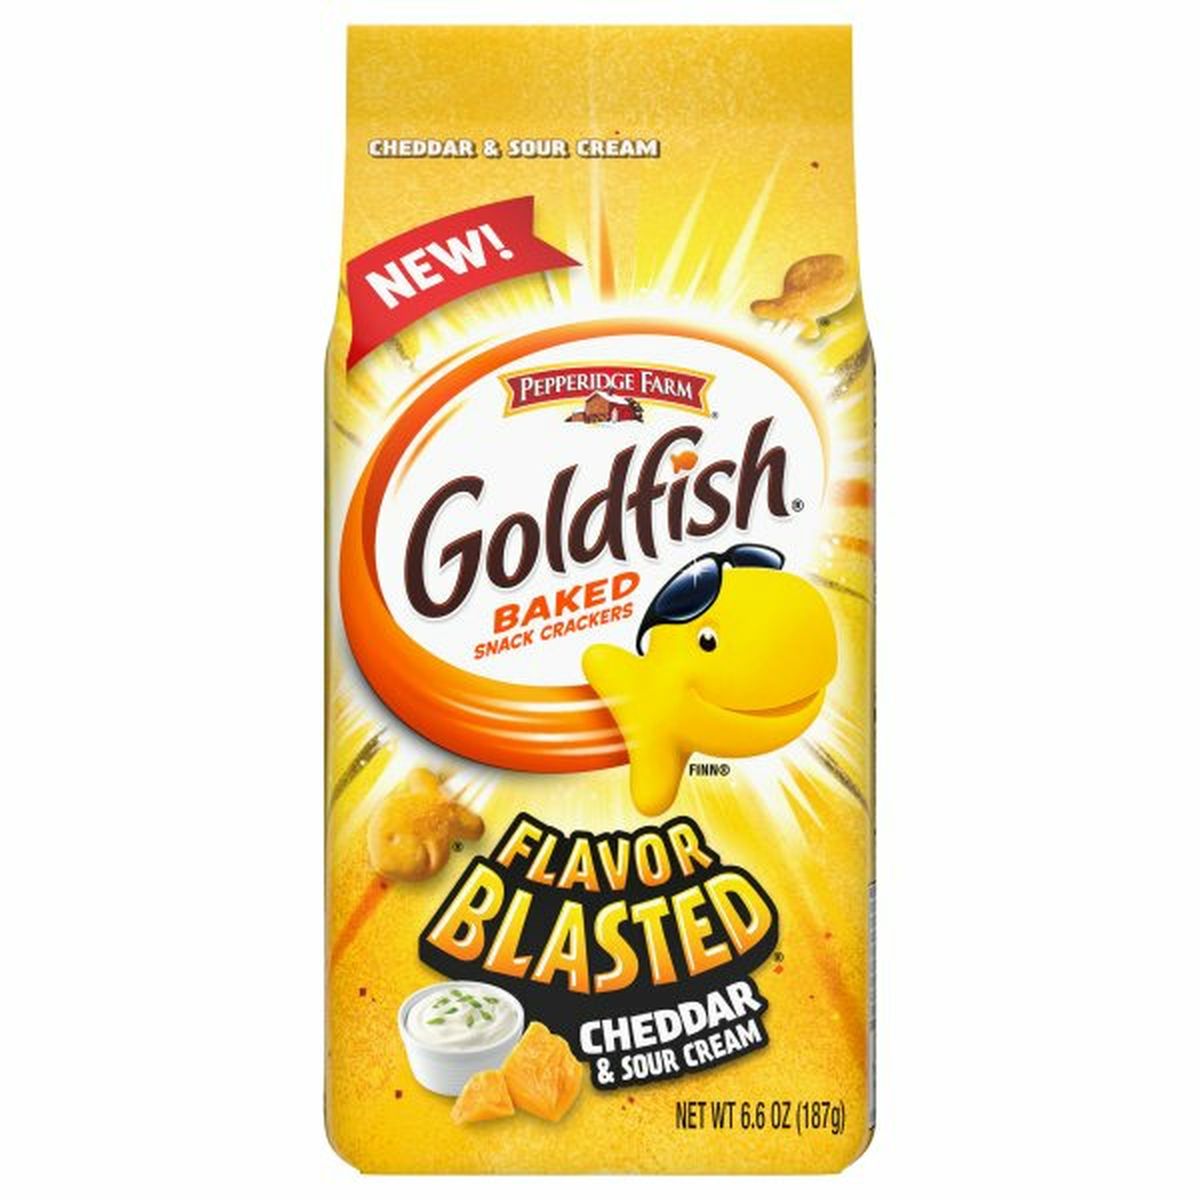 Calories in Pepperidge Farms  Goldfishs Flavor Blasteds Flavor Blasted Baked Snack Crackers, Cheddar & Sour Cream